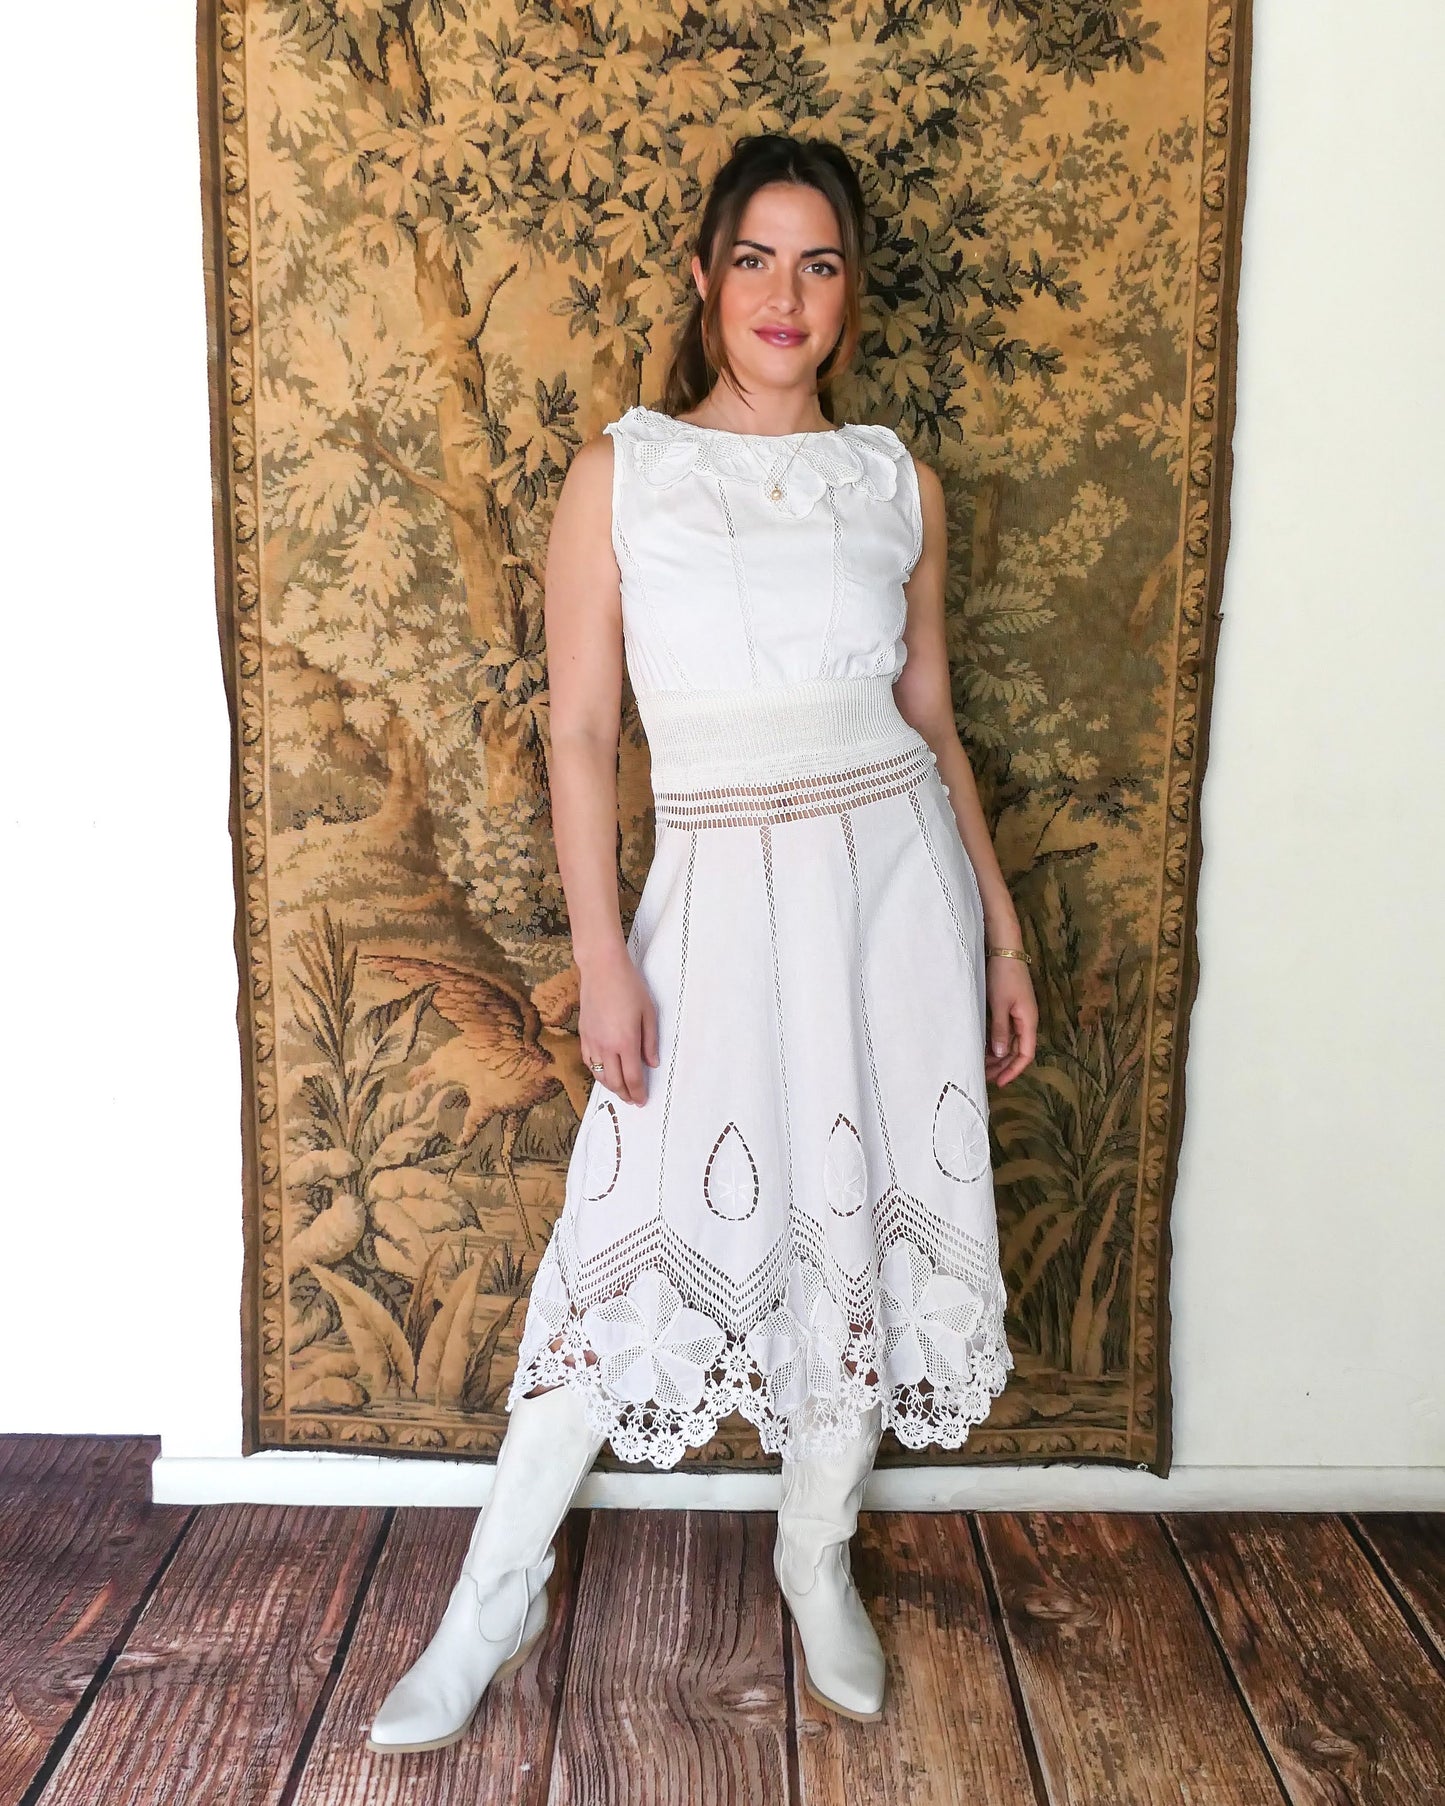 A white cotton midi dress with whimsical crochet and embroidered flowers at the hem and collar, and teardrop shaped eyelet detail on the skirt. Stretchable ribbed knit fabric around the waist adds contour to the dress.  Made by Lim's Vintage.